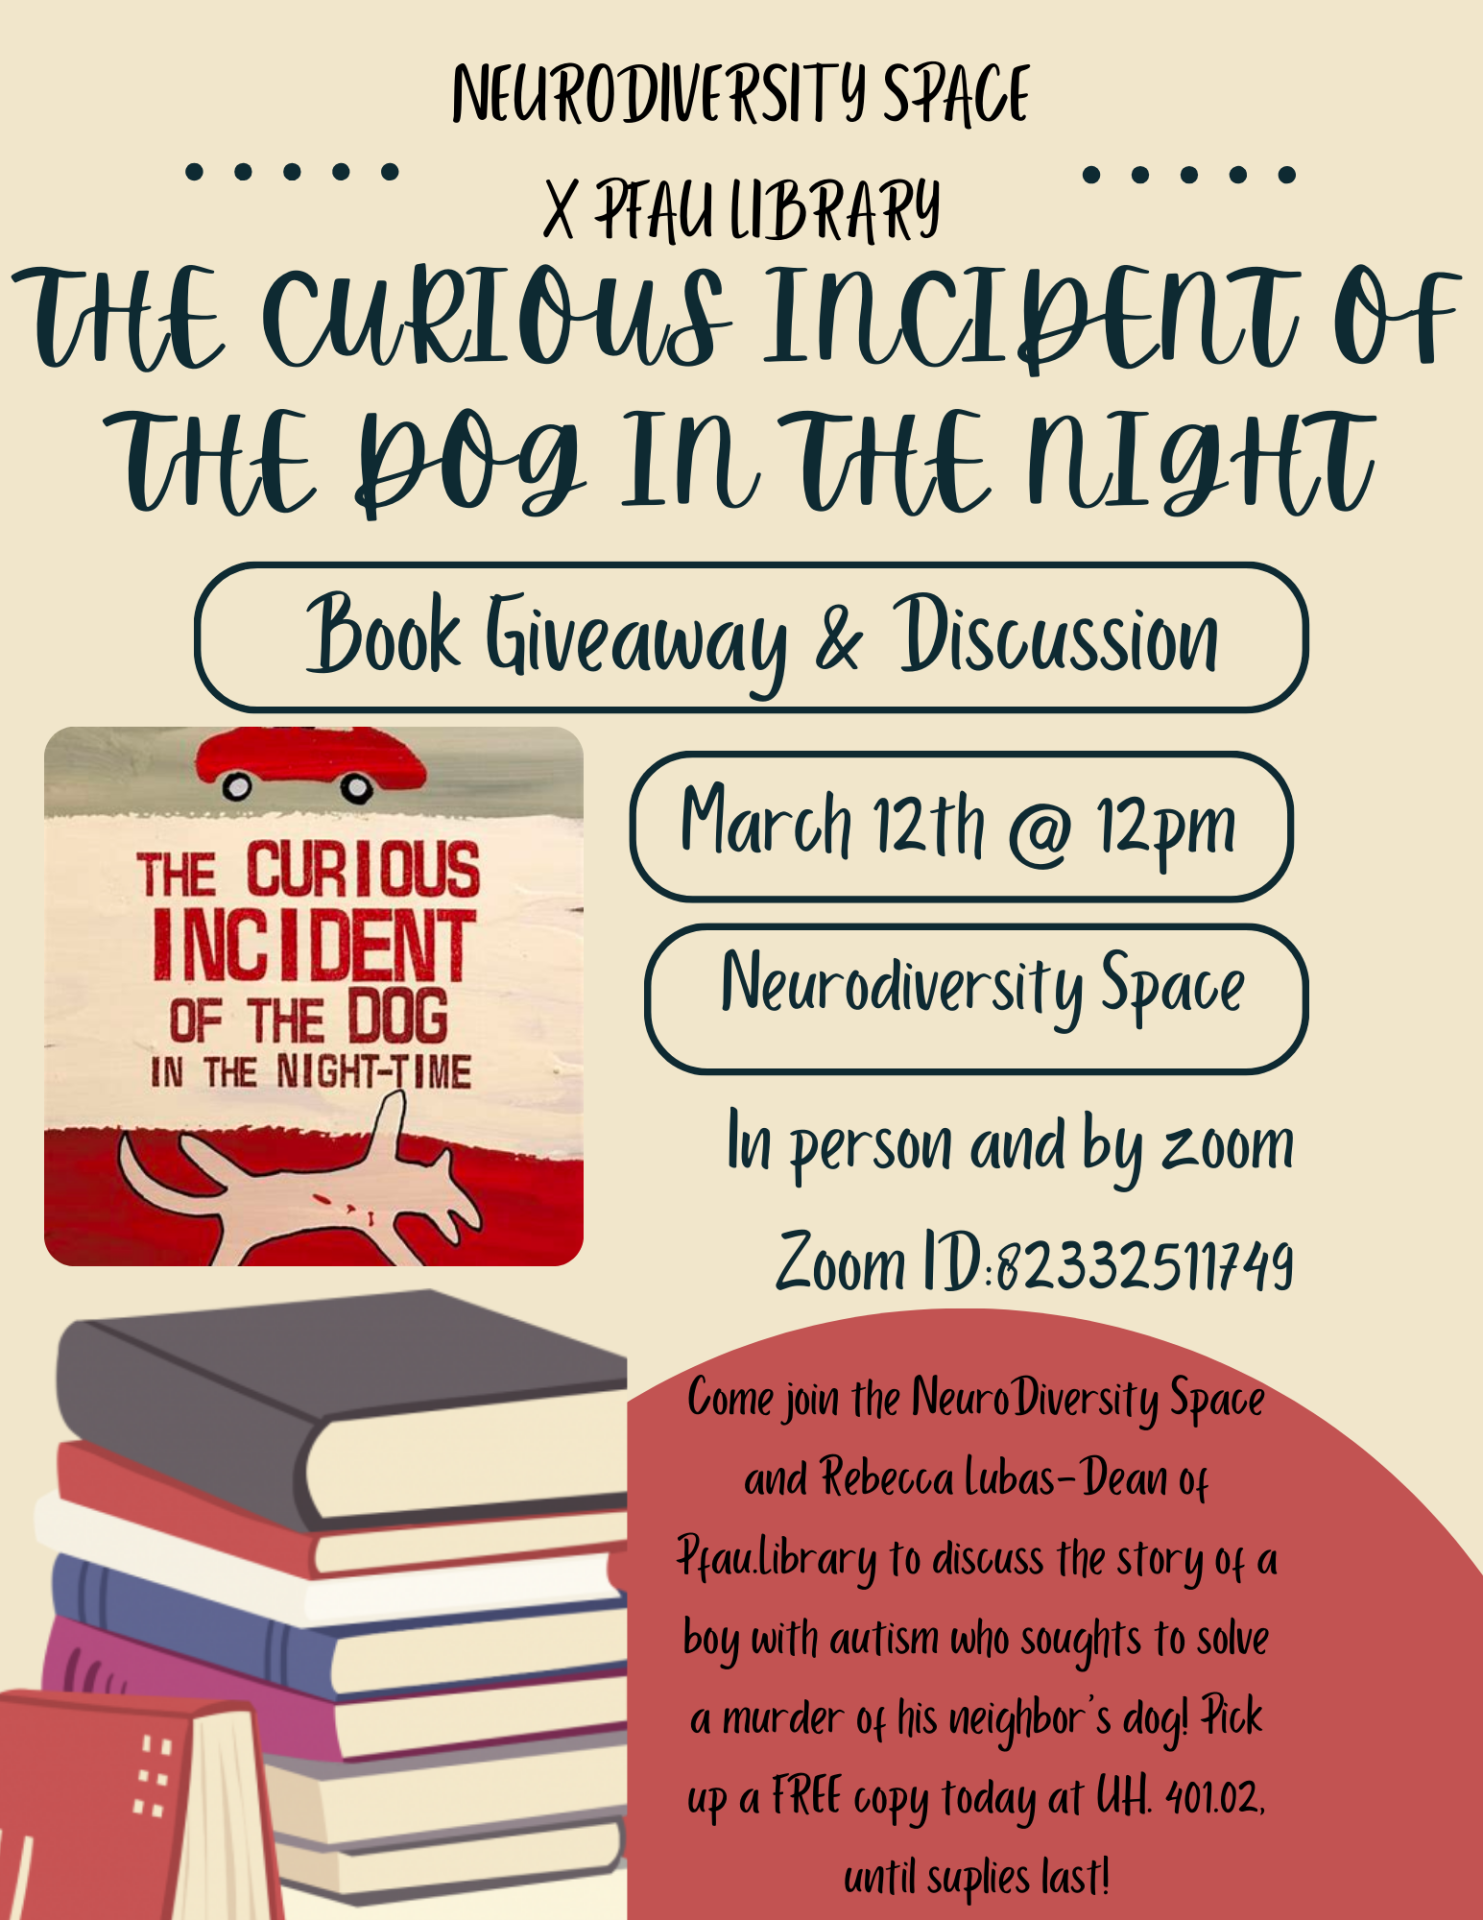 NERUO SPACE X PFAU LIBRARY: The curious incident of the dog in the night book giveaway and discussion March 12th at 12PM Neurodiversity space in person and by zoom. Zoom ID: 82332511749. Come join the neurodiversity space and rebecca lubas - dean of pfau library to discusss the story of a boy with audism who soughts to solve a murder of his neighbor's dog! Pick up a free copy today at UH 401.02  while supplies last! 